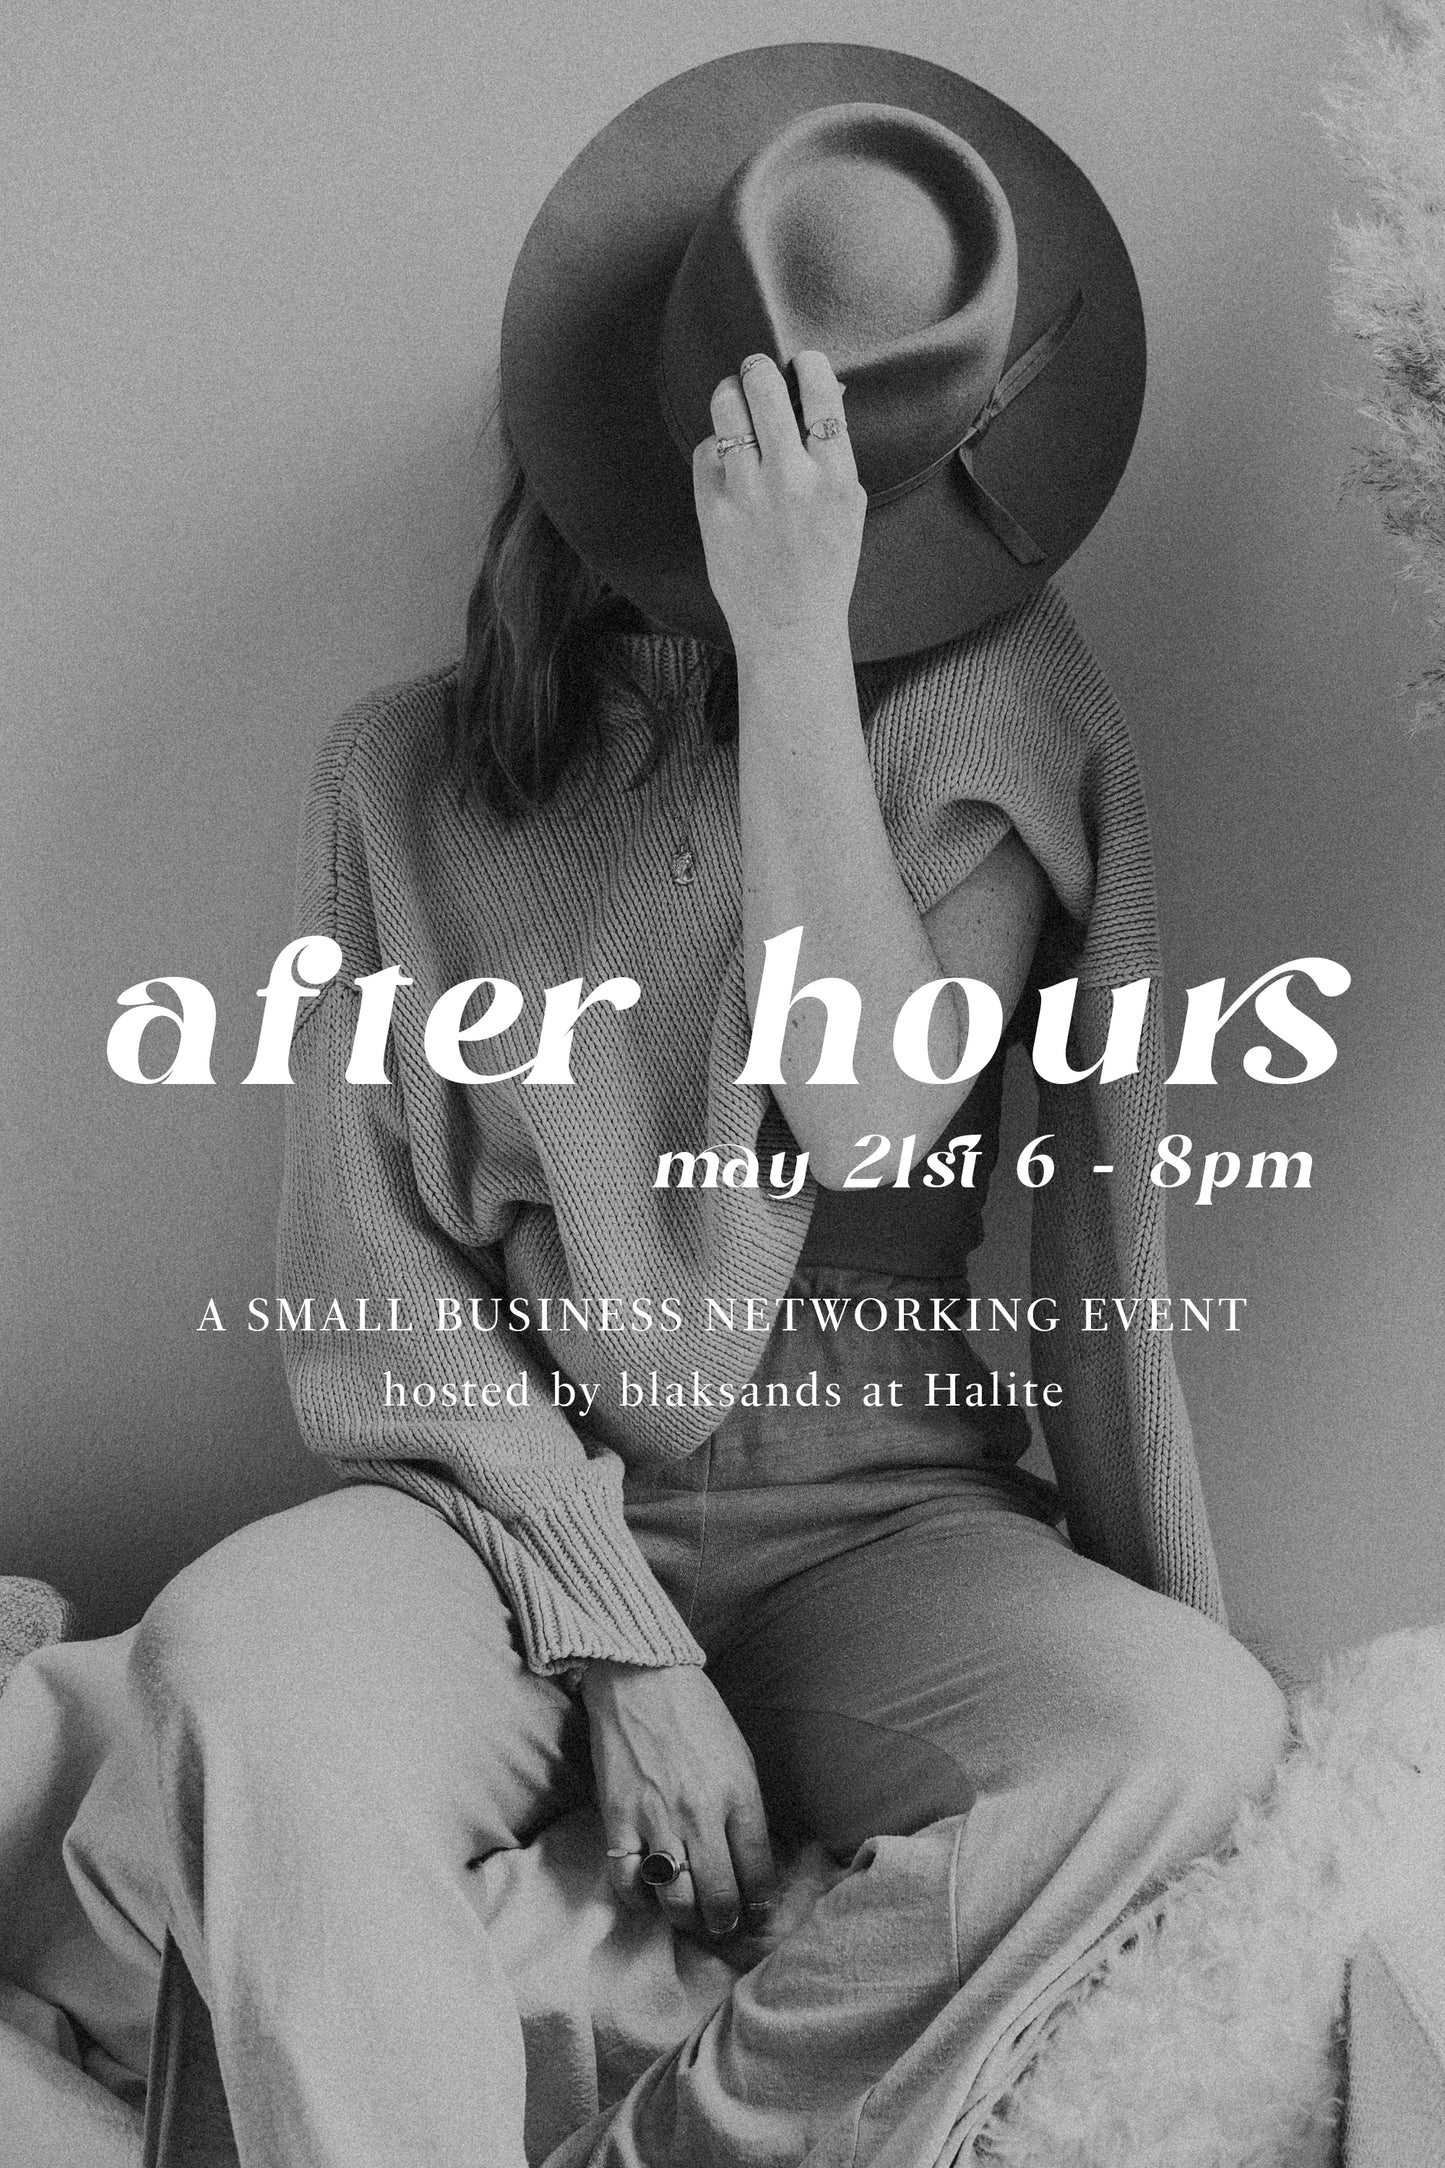 After Hours at Halite - a Small Business networking event - May 21st